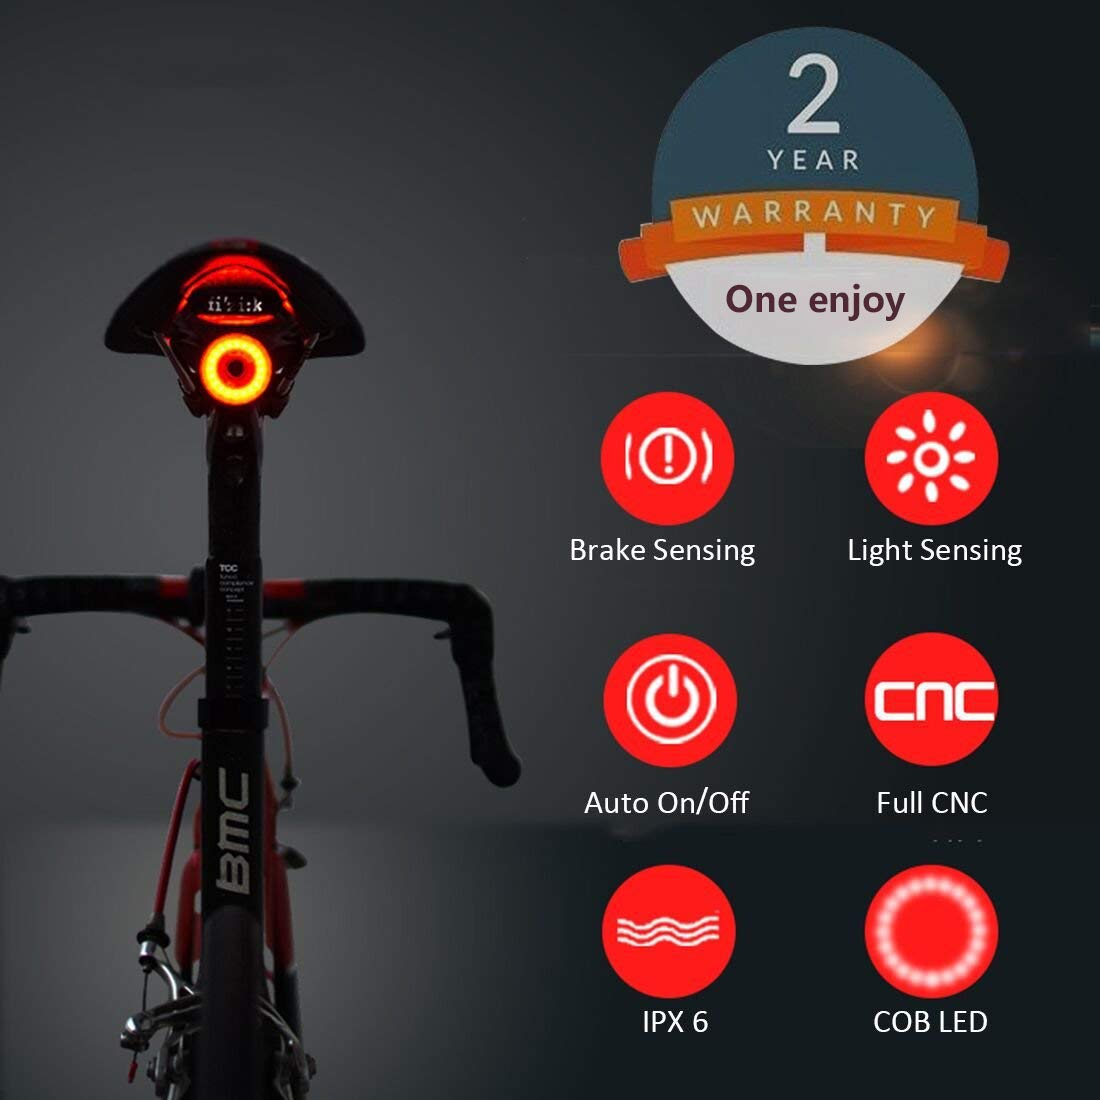 Bike Tail Light Ultra Bright, Bike Light Rechargeable Auto on-off, IPX6 Waterproof LED Bicycle lights,High Intensity Rear LED Accessories Fits On Any Road Bikes, Helmets, Easy To Install